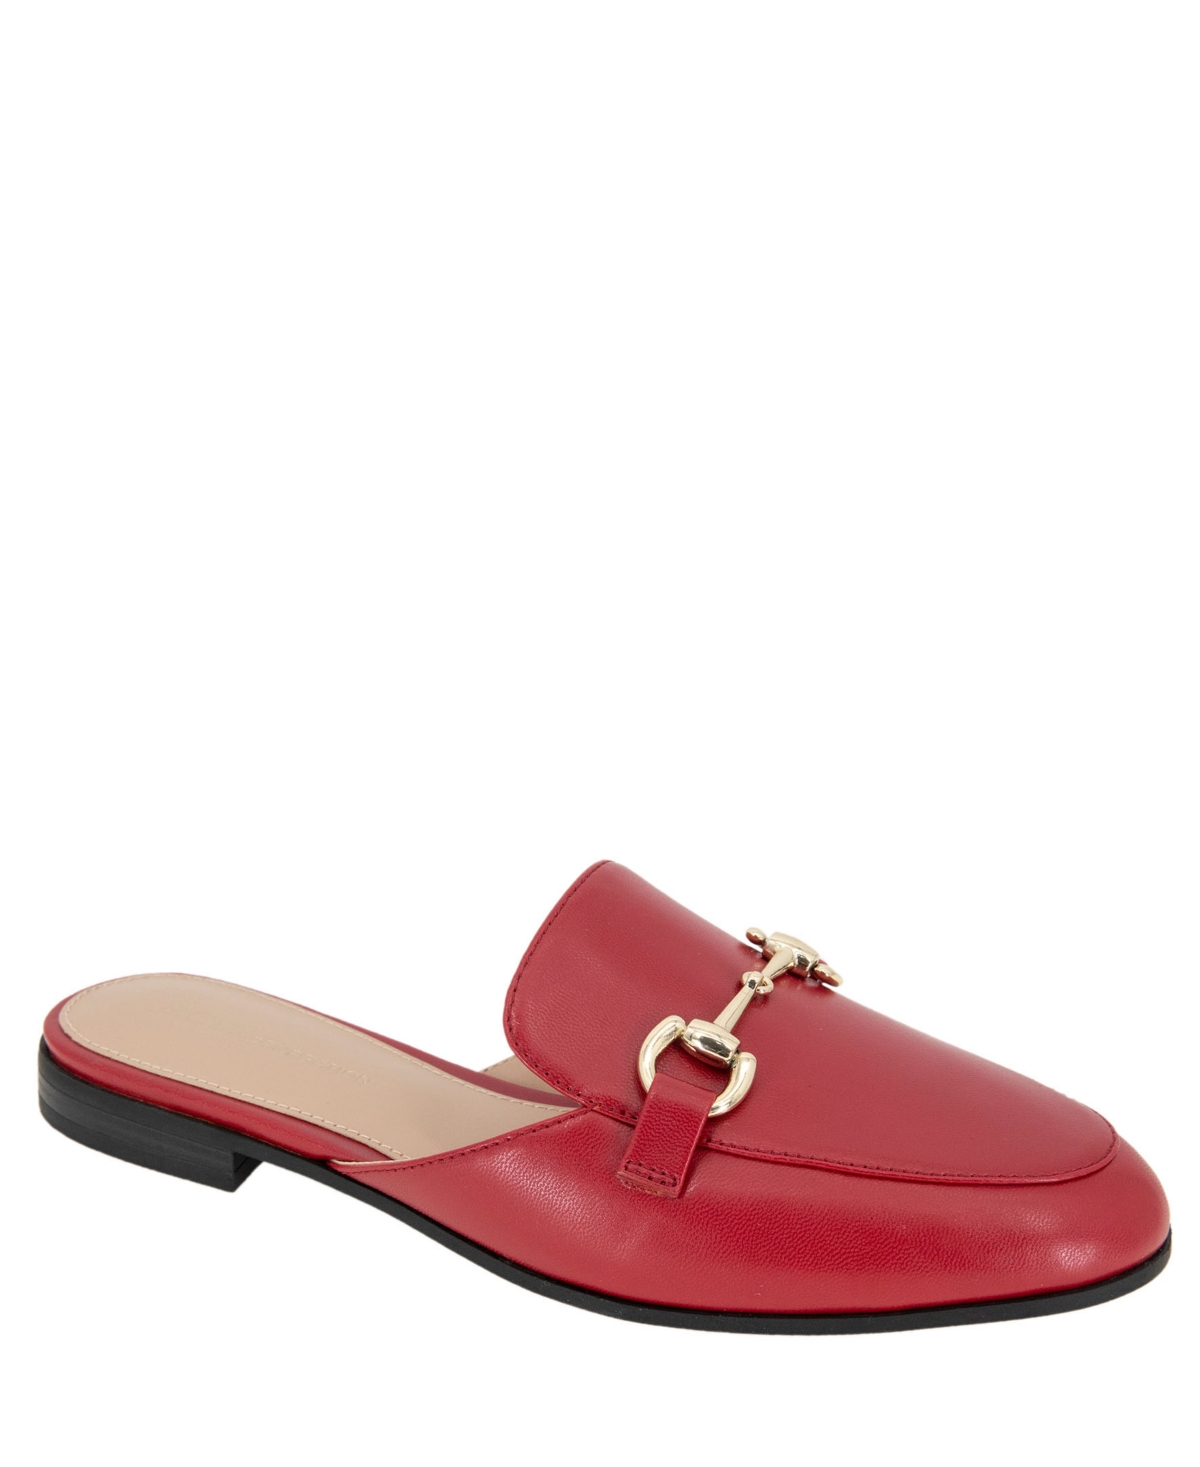 Women's Zorie Tailored Slip-On Loafer Mules - Lipstick Red